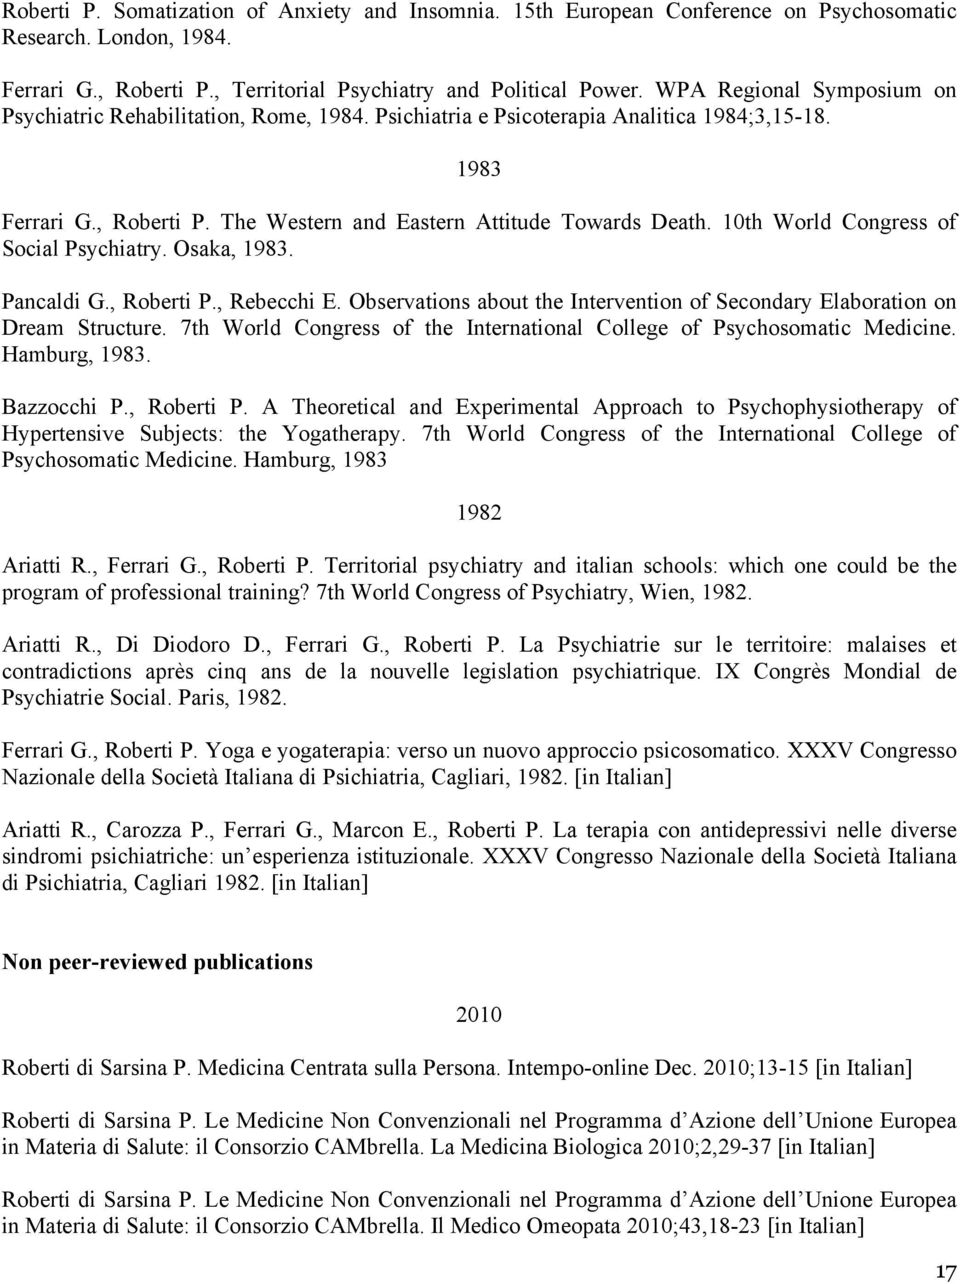 10th World Congress of Social Psychiatry. Osaka, 1983. Pancaldi G., Roberti P., Rebecchi E. Observations about the Intervention of Secondary Elaboration on Dream Structure.